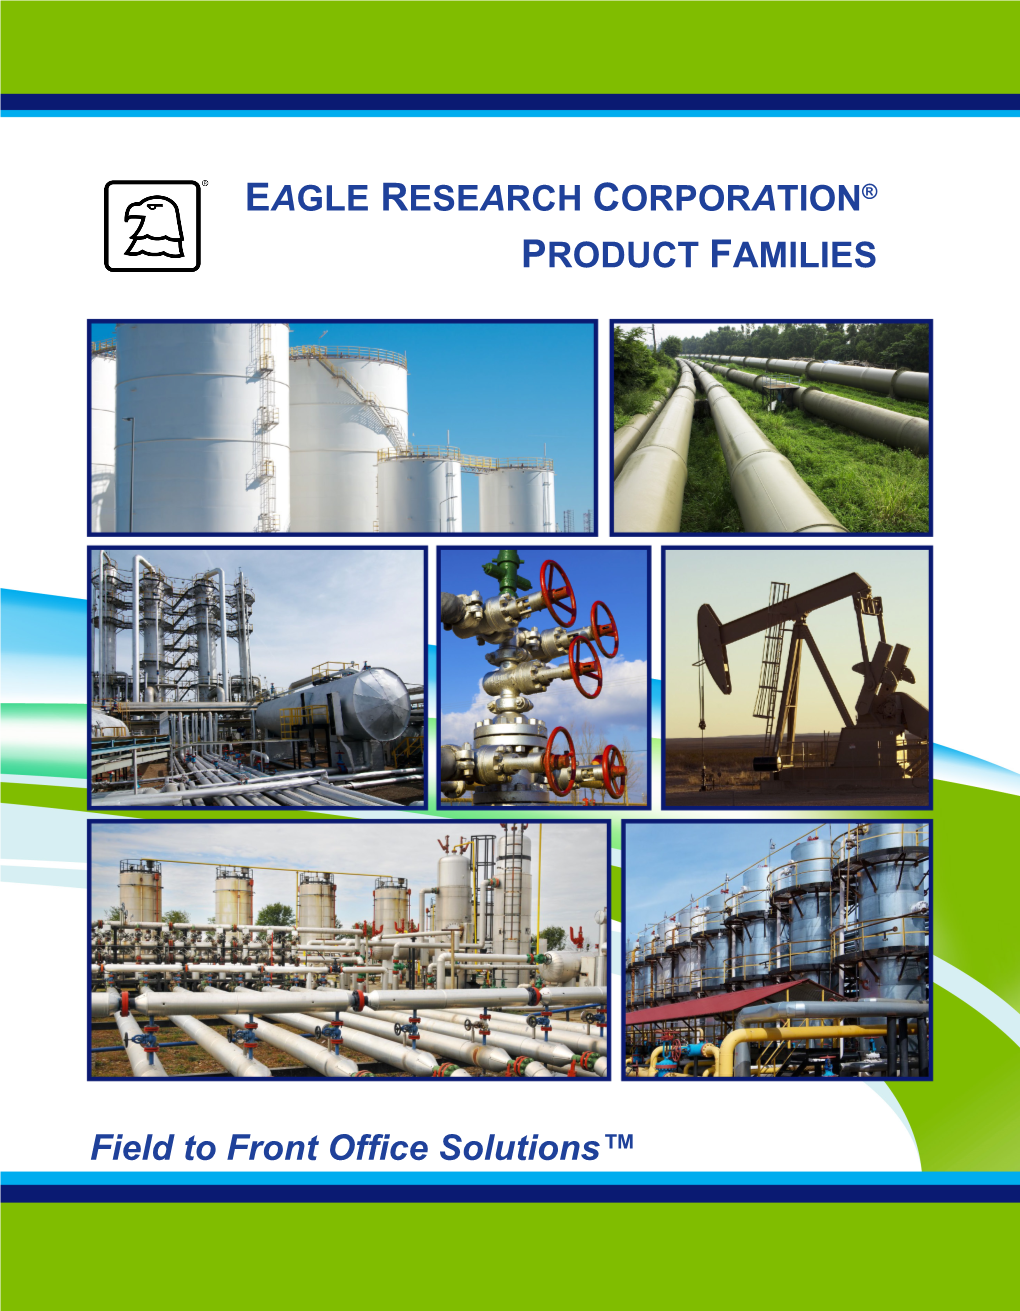 Eagle Research Corporation® Product Families